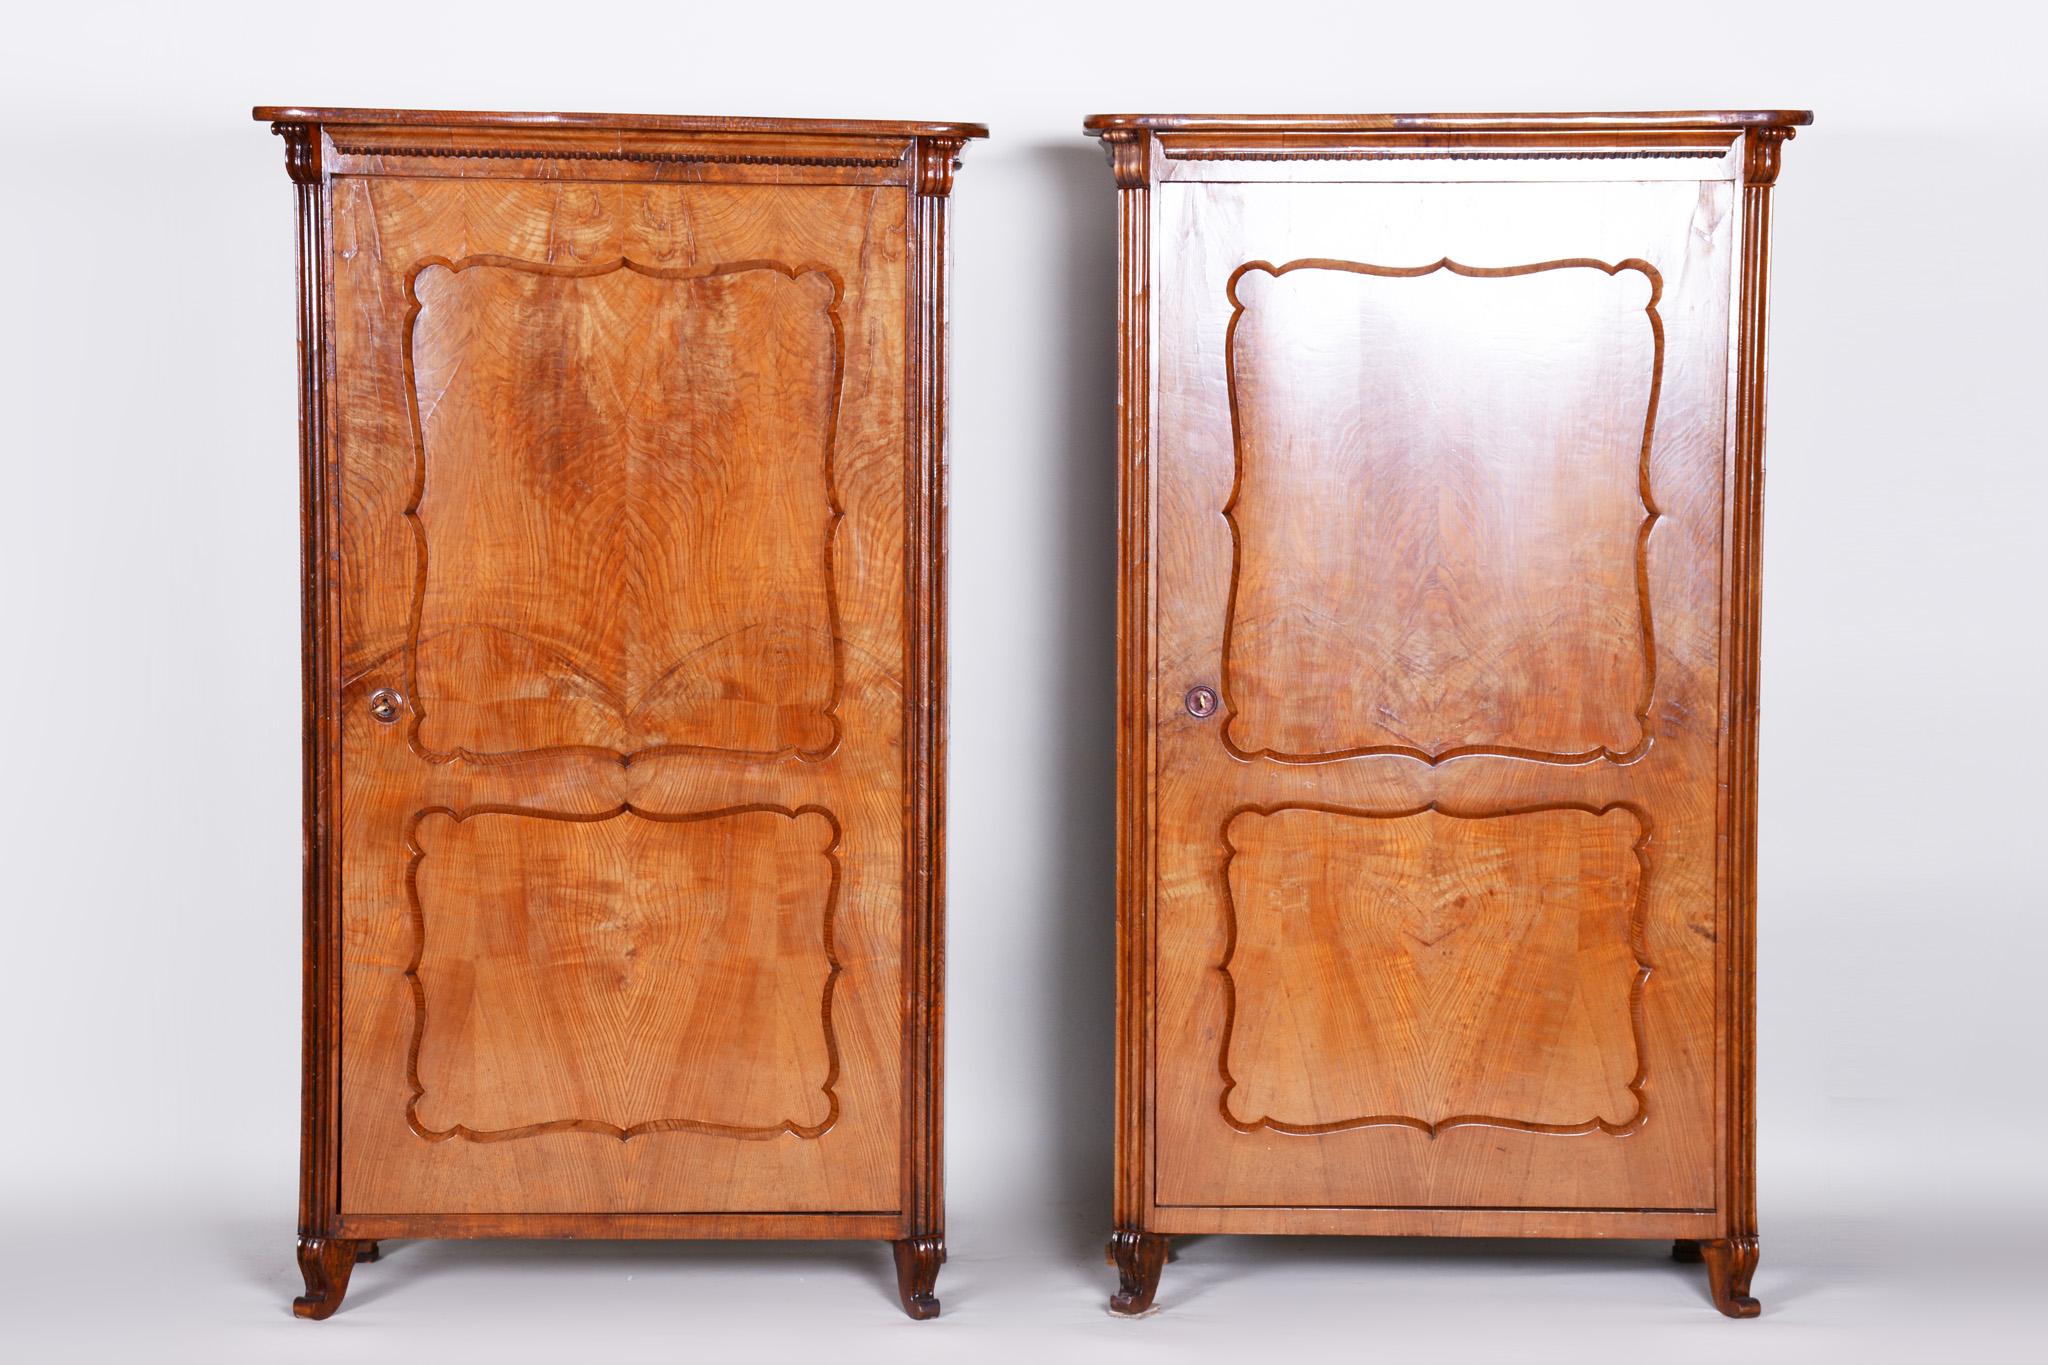 Shipping to any US port only for $290 USD

Completely restored Czech one door Biedermeier wardrobe cabinets.
Source: Bohemia (Czechia)
Period: 1840-1849
Material: Ash.